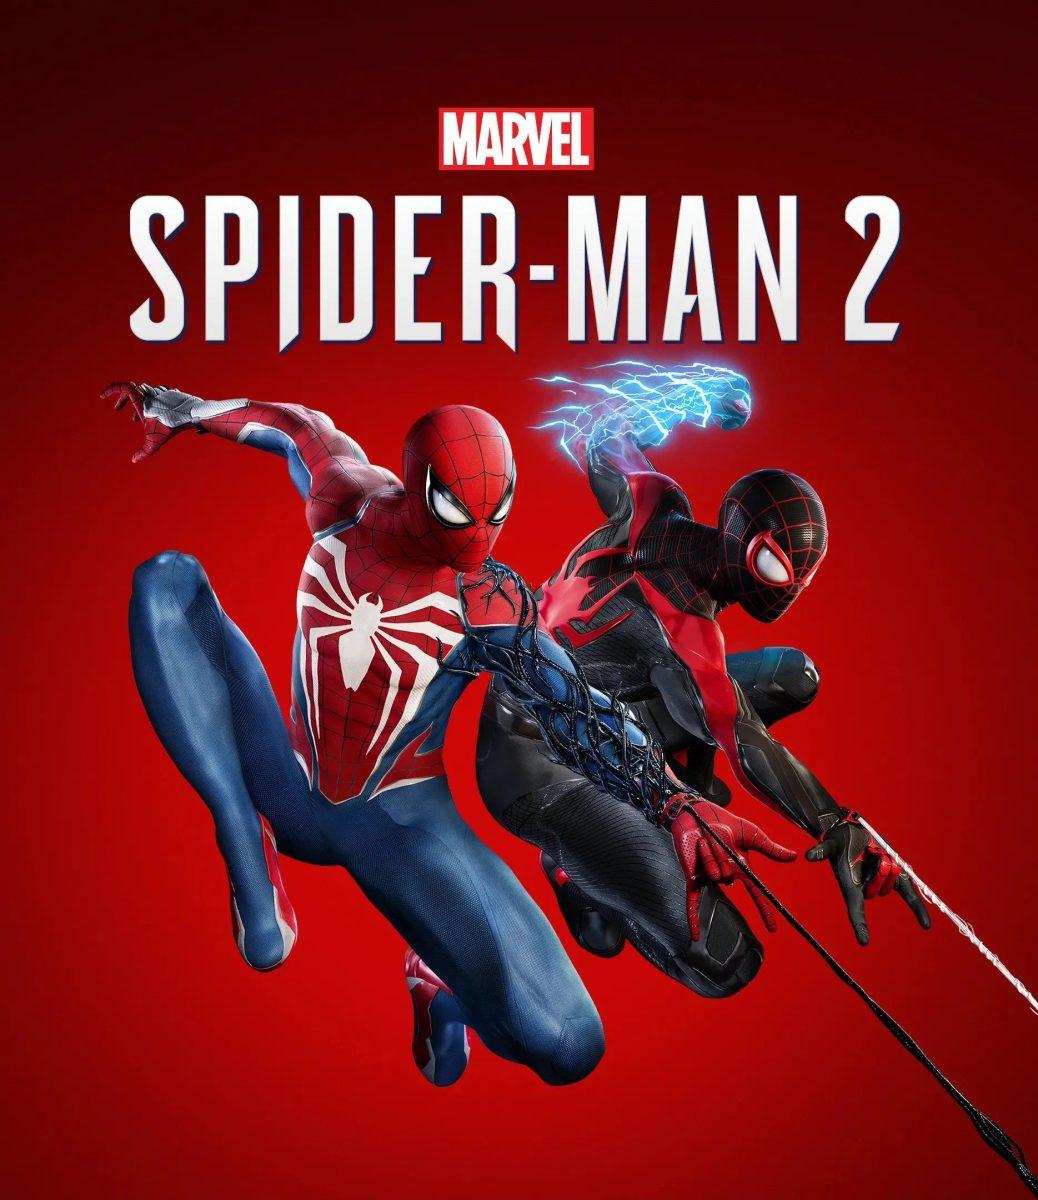 Marvels Spider-Man 2 released exclusively for the Playstation 5.